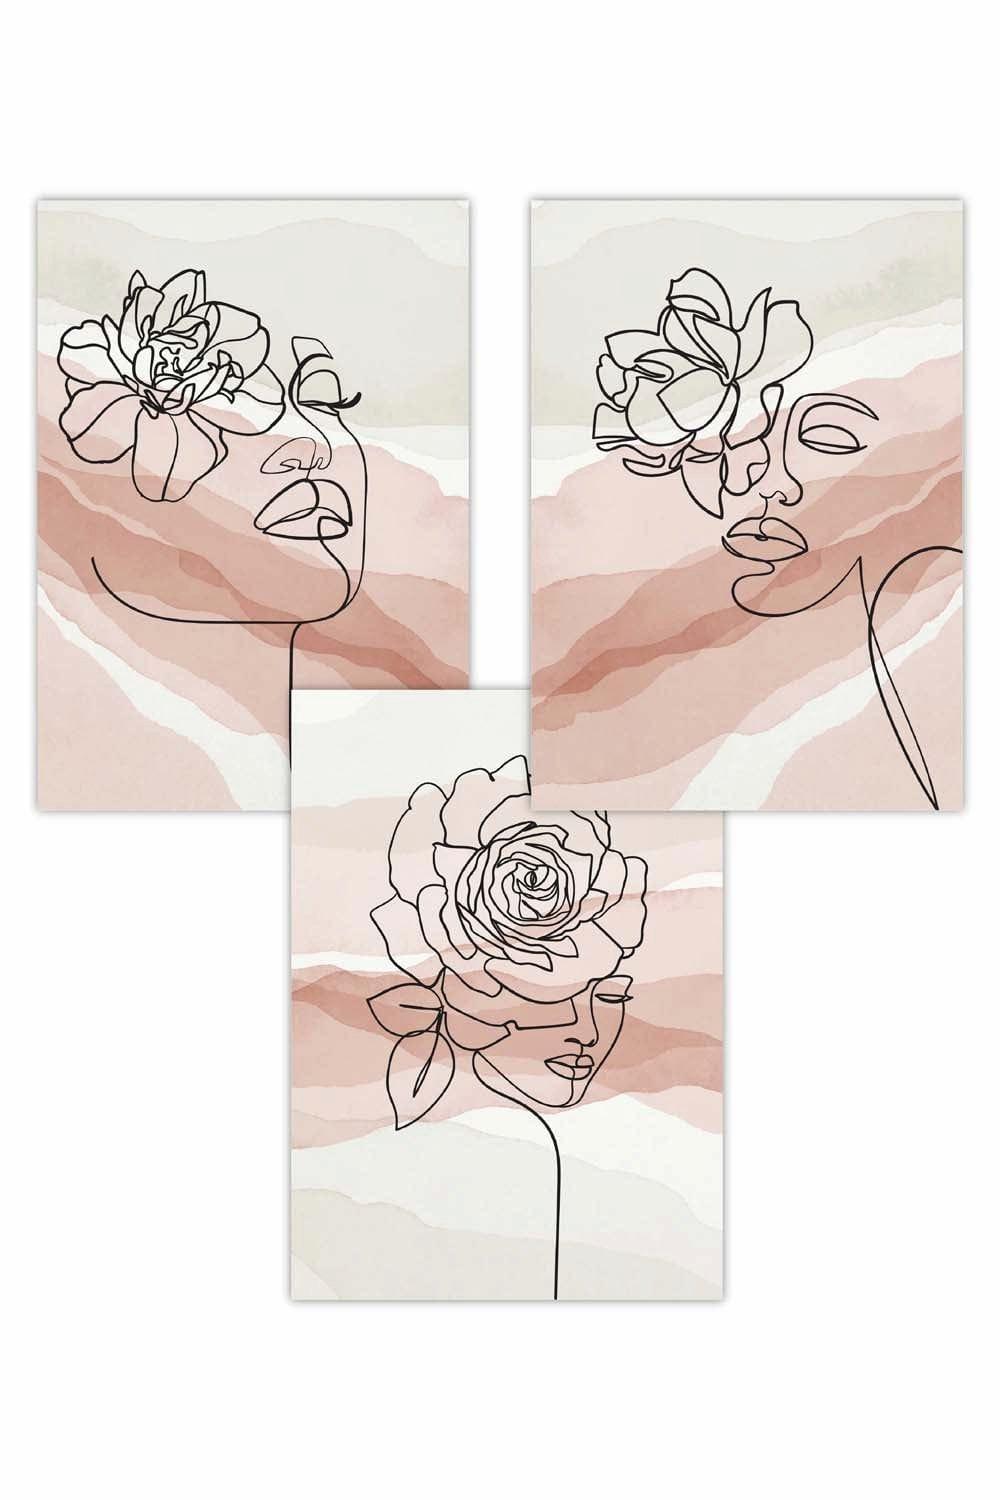 Set of 3 Female Line Art Floral Faces on Pink and Ivory Art Posters